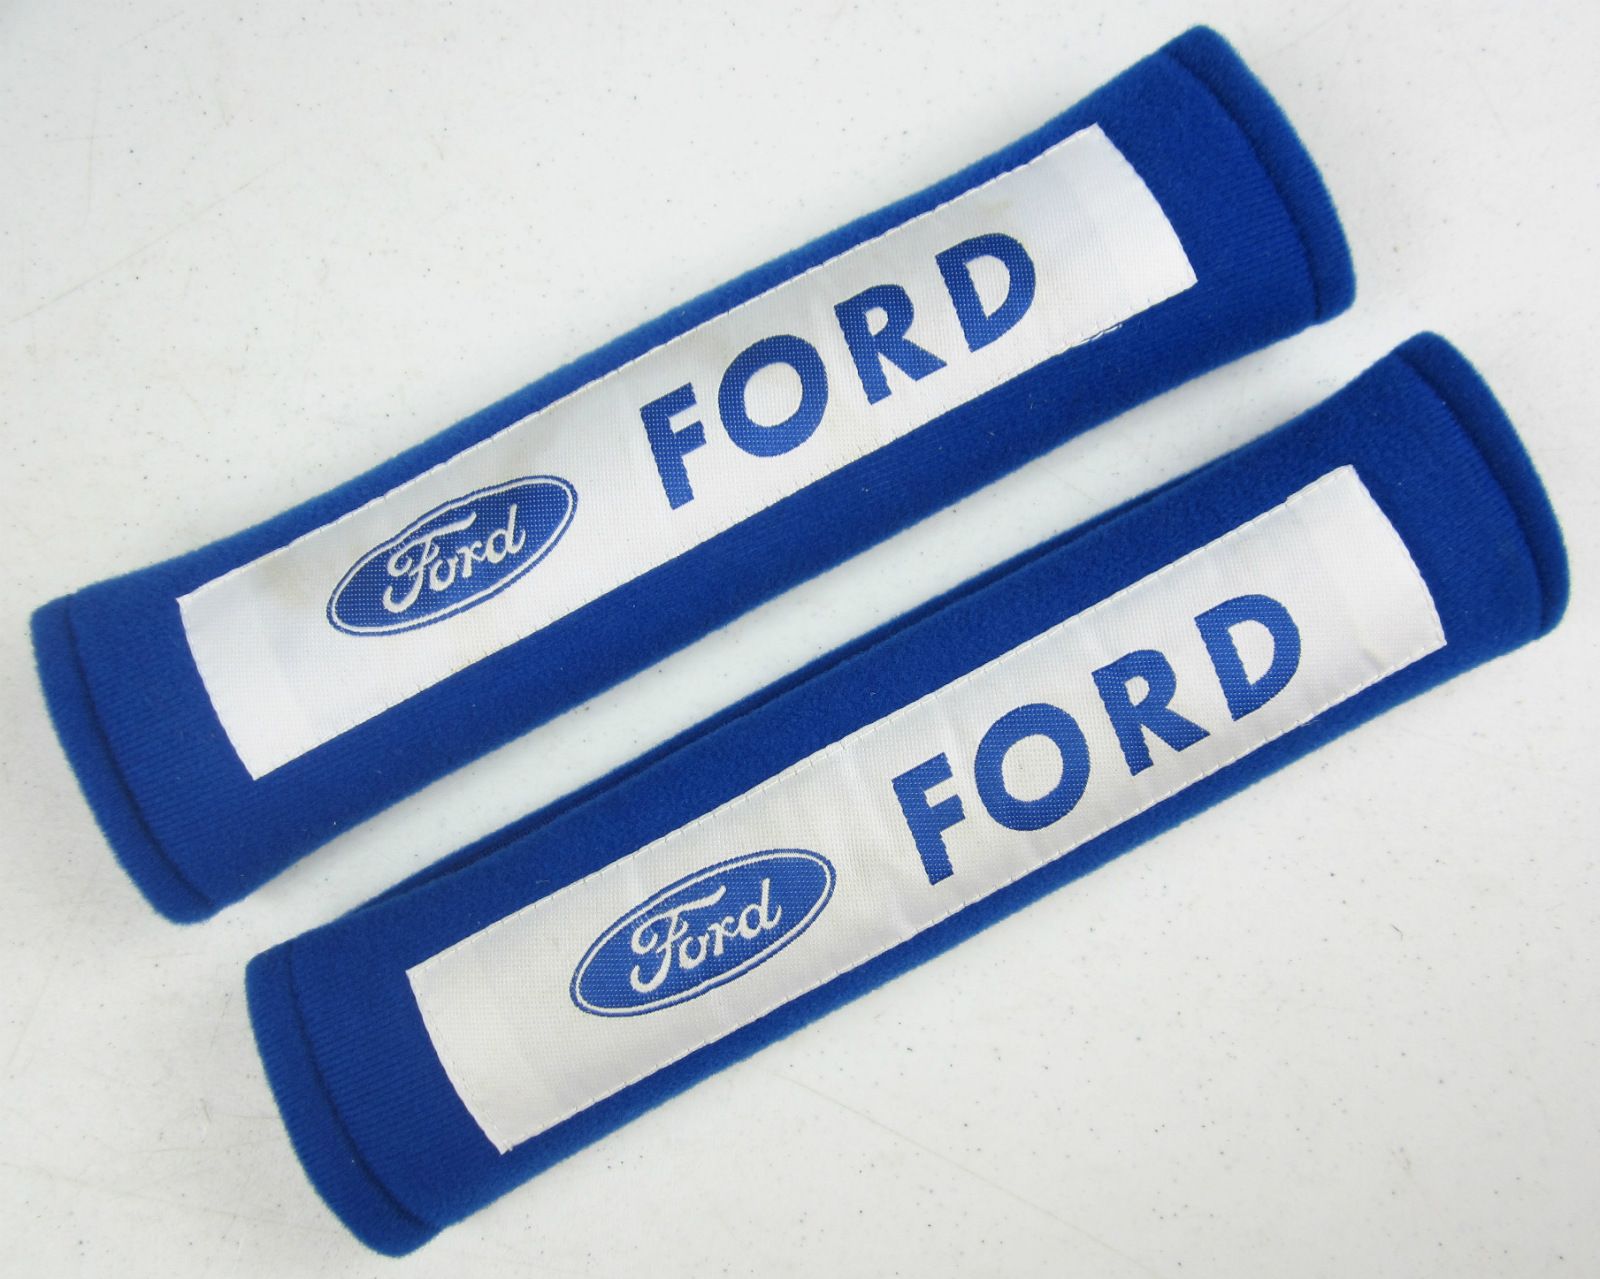 Brand New Genuine Ford Seat Belt Shoulder Pads Cushions Blue 2 Piece